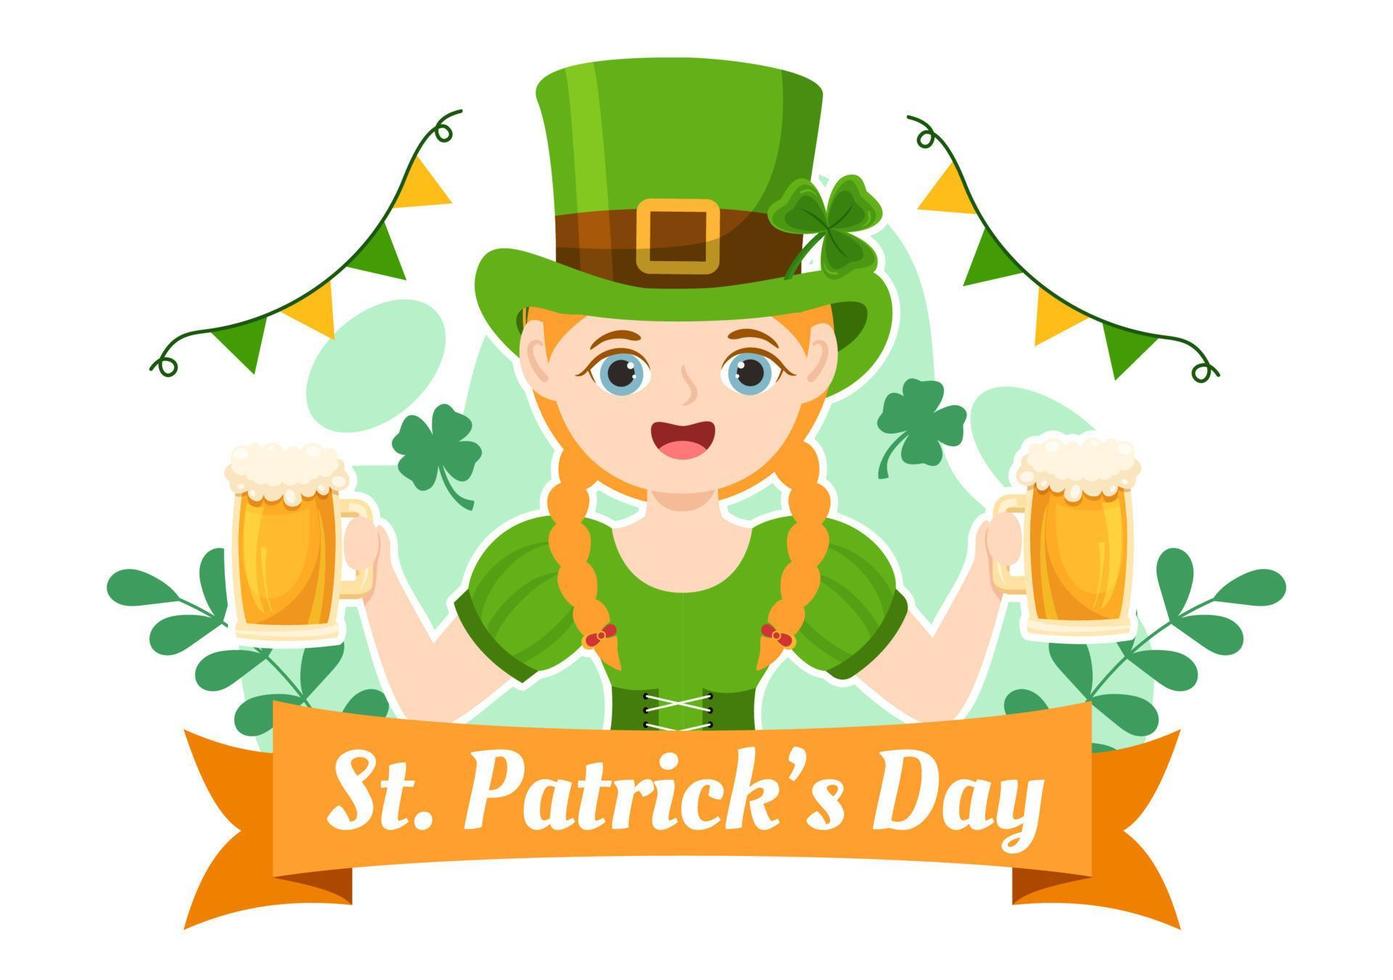 Happy St Patricks Day Illustration with Kids, Golden Coins, Green Hat, Leprechauns and Shamrock in Flat Cartoon Hand Drawn for Landing Page Templates vector